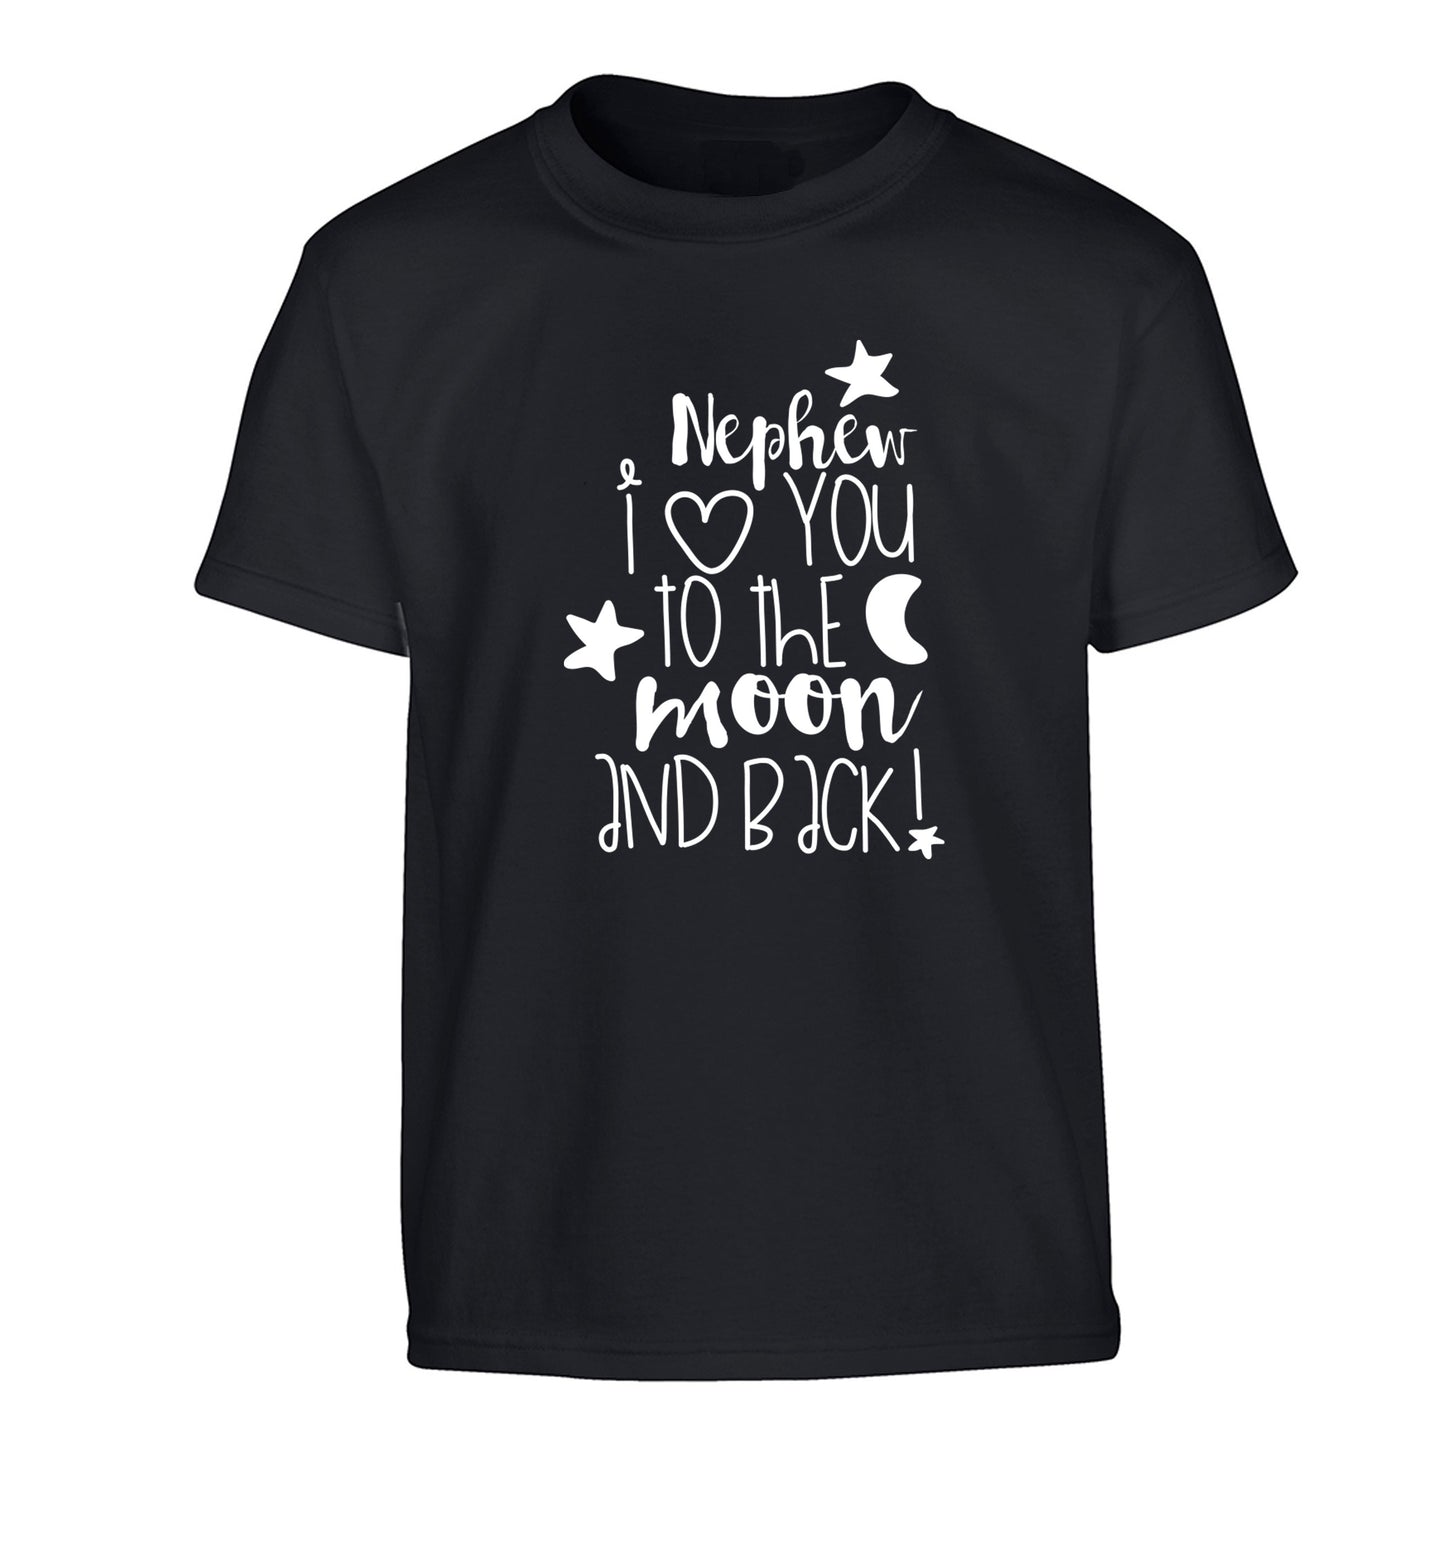 Nephew I love you to the moon and back Children's black Tshirt 12-14 Years